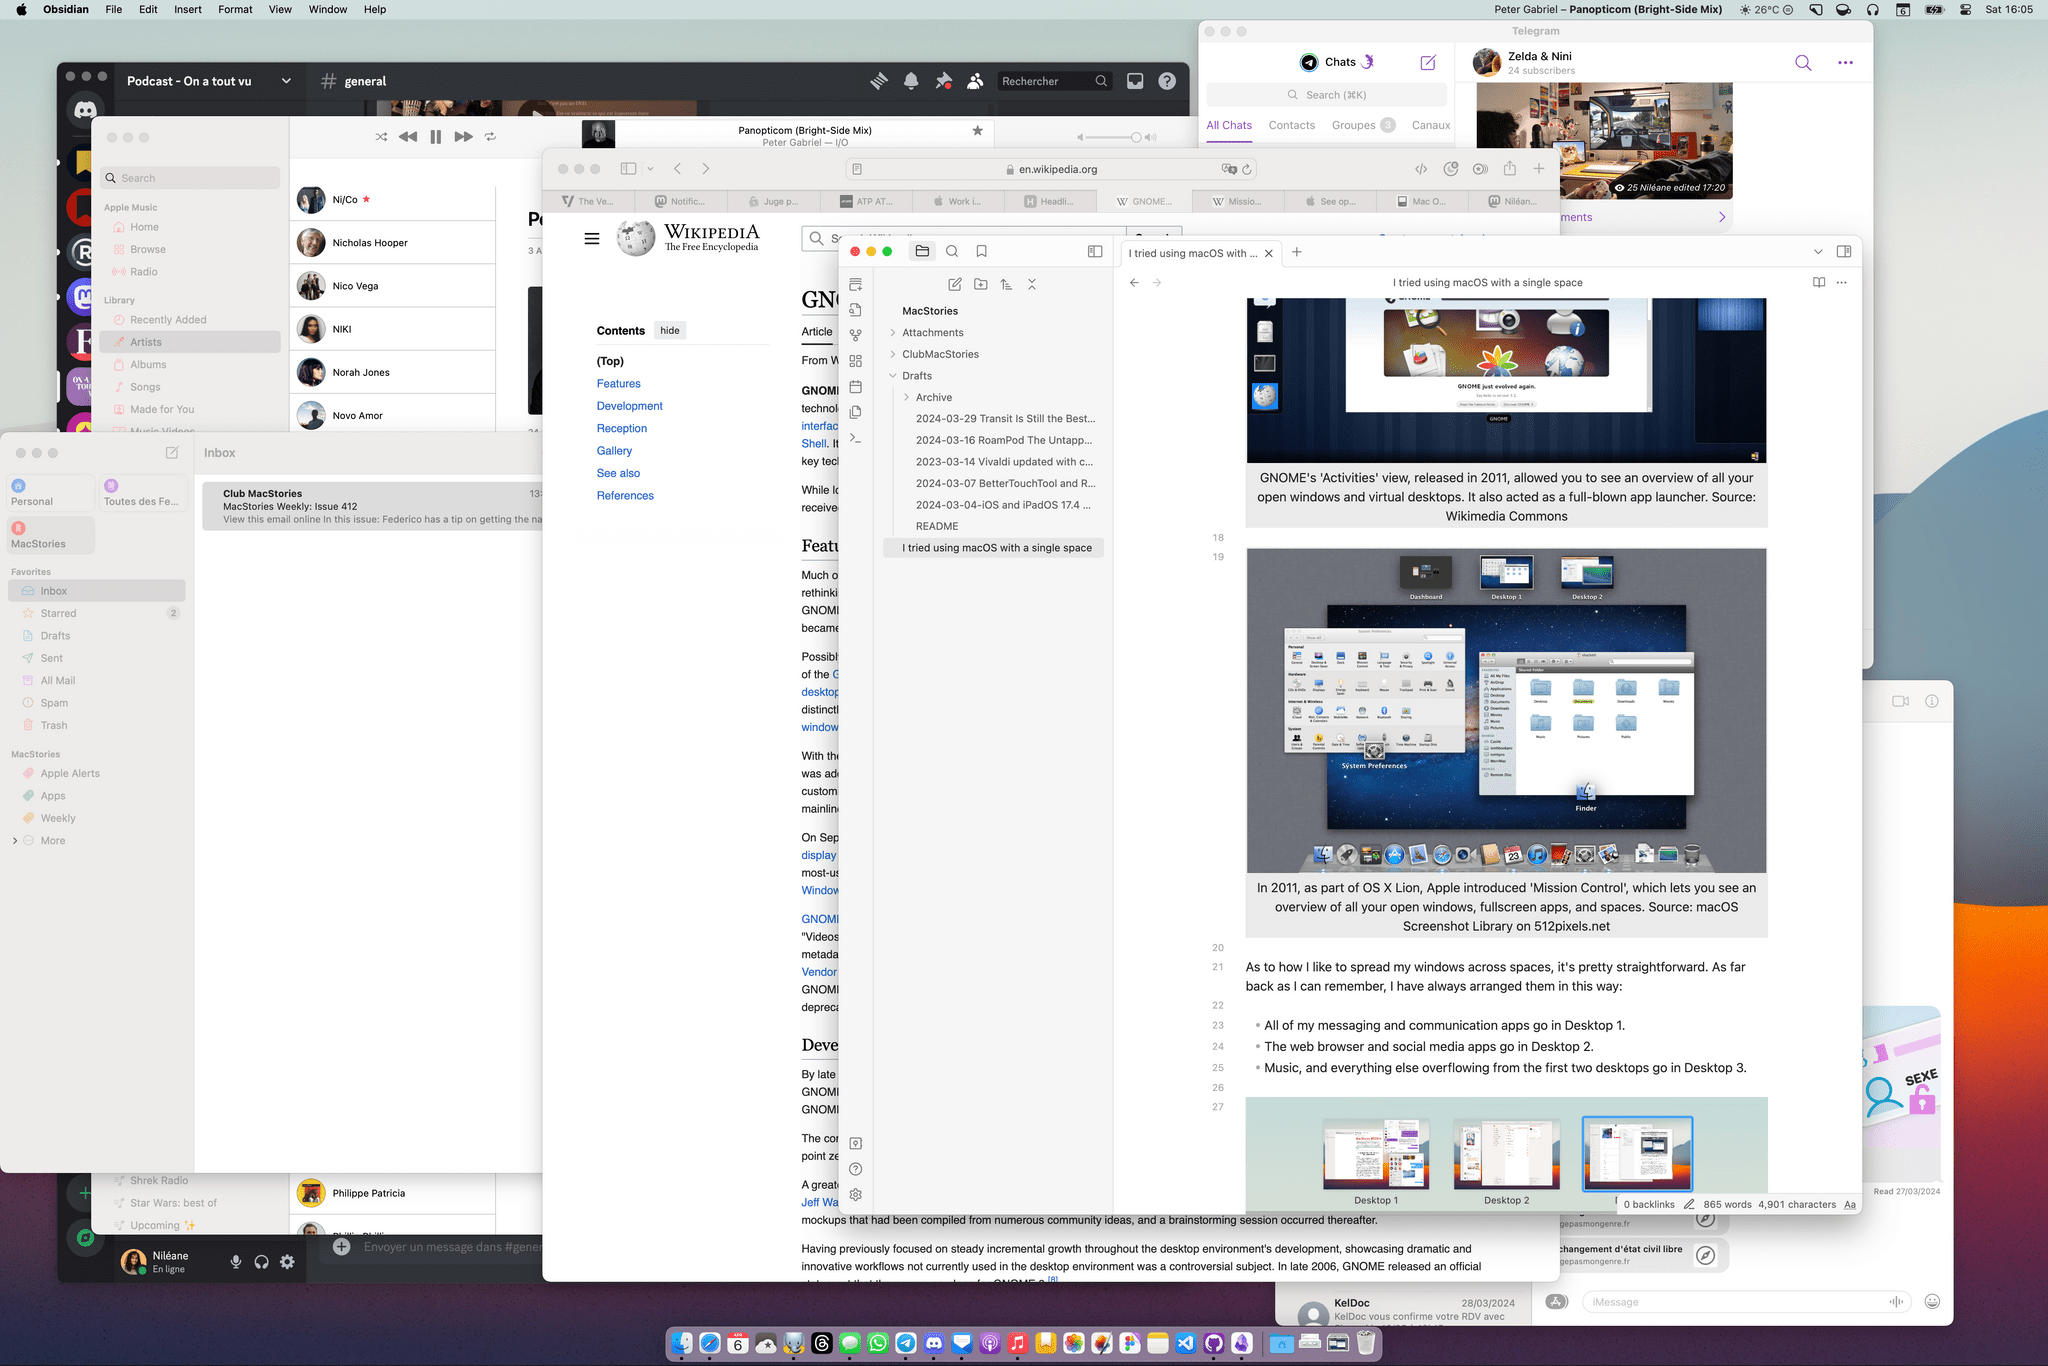 After merging all of my spaces into one, my Mac desktop looked like this.